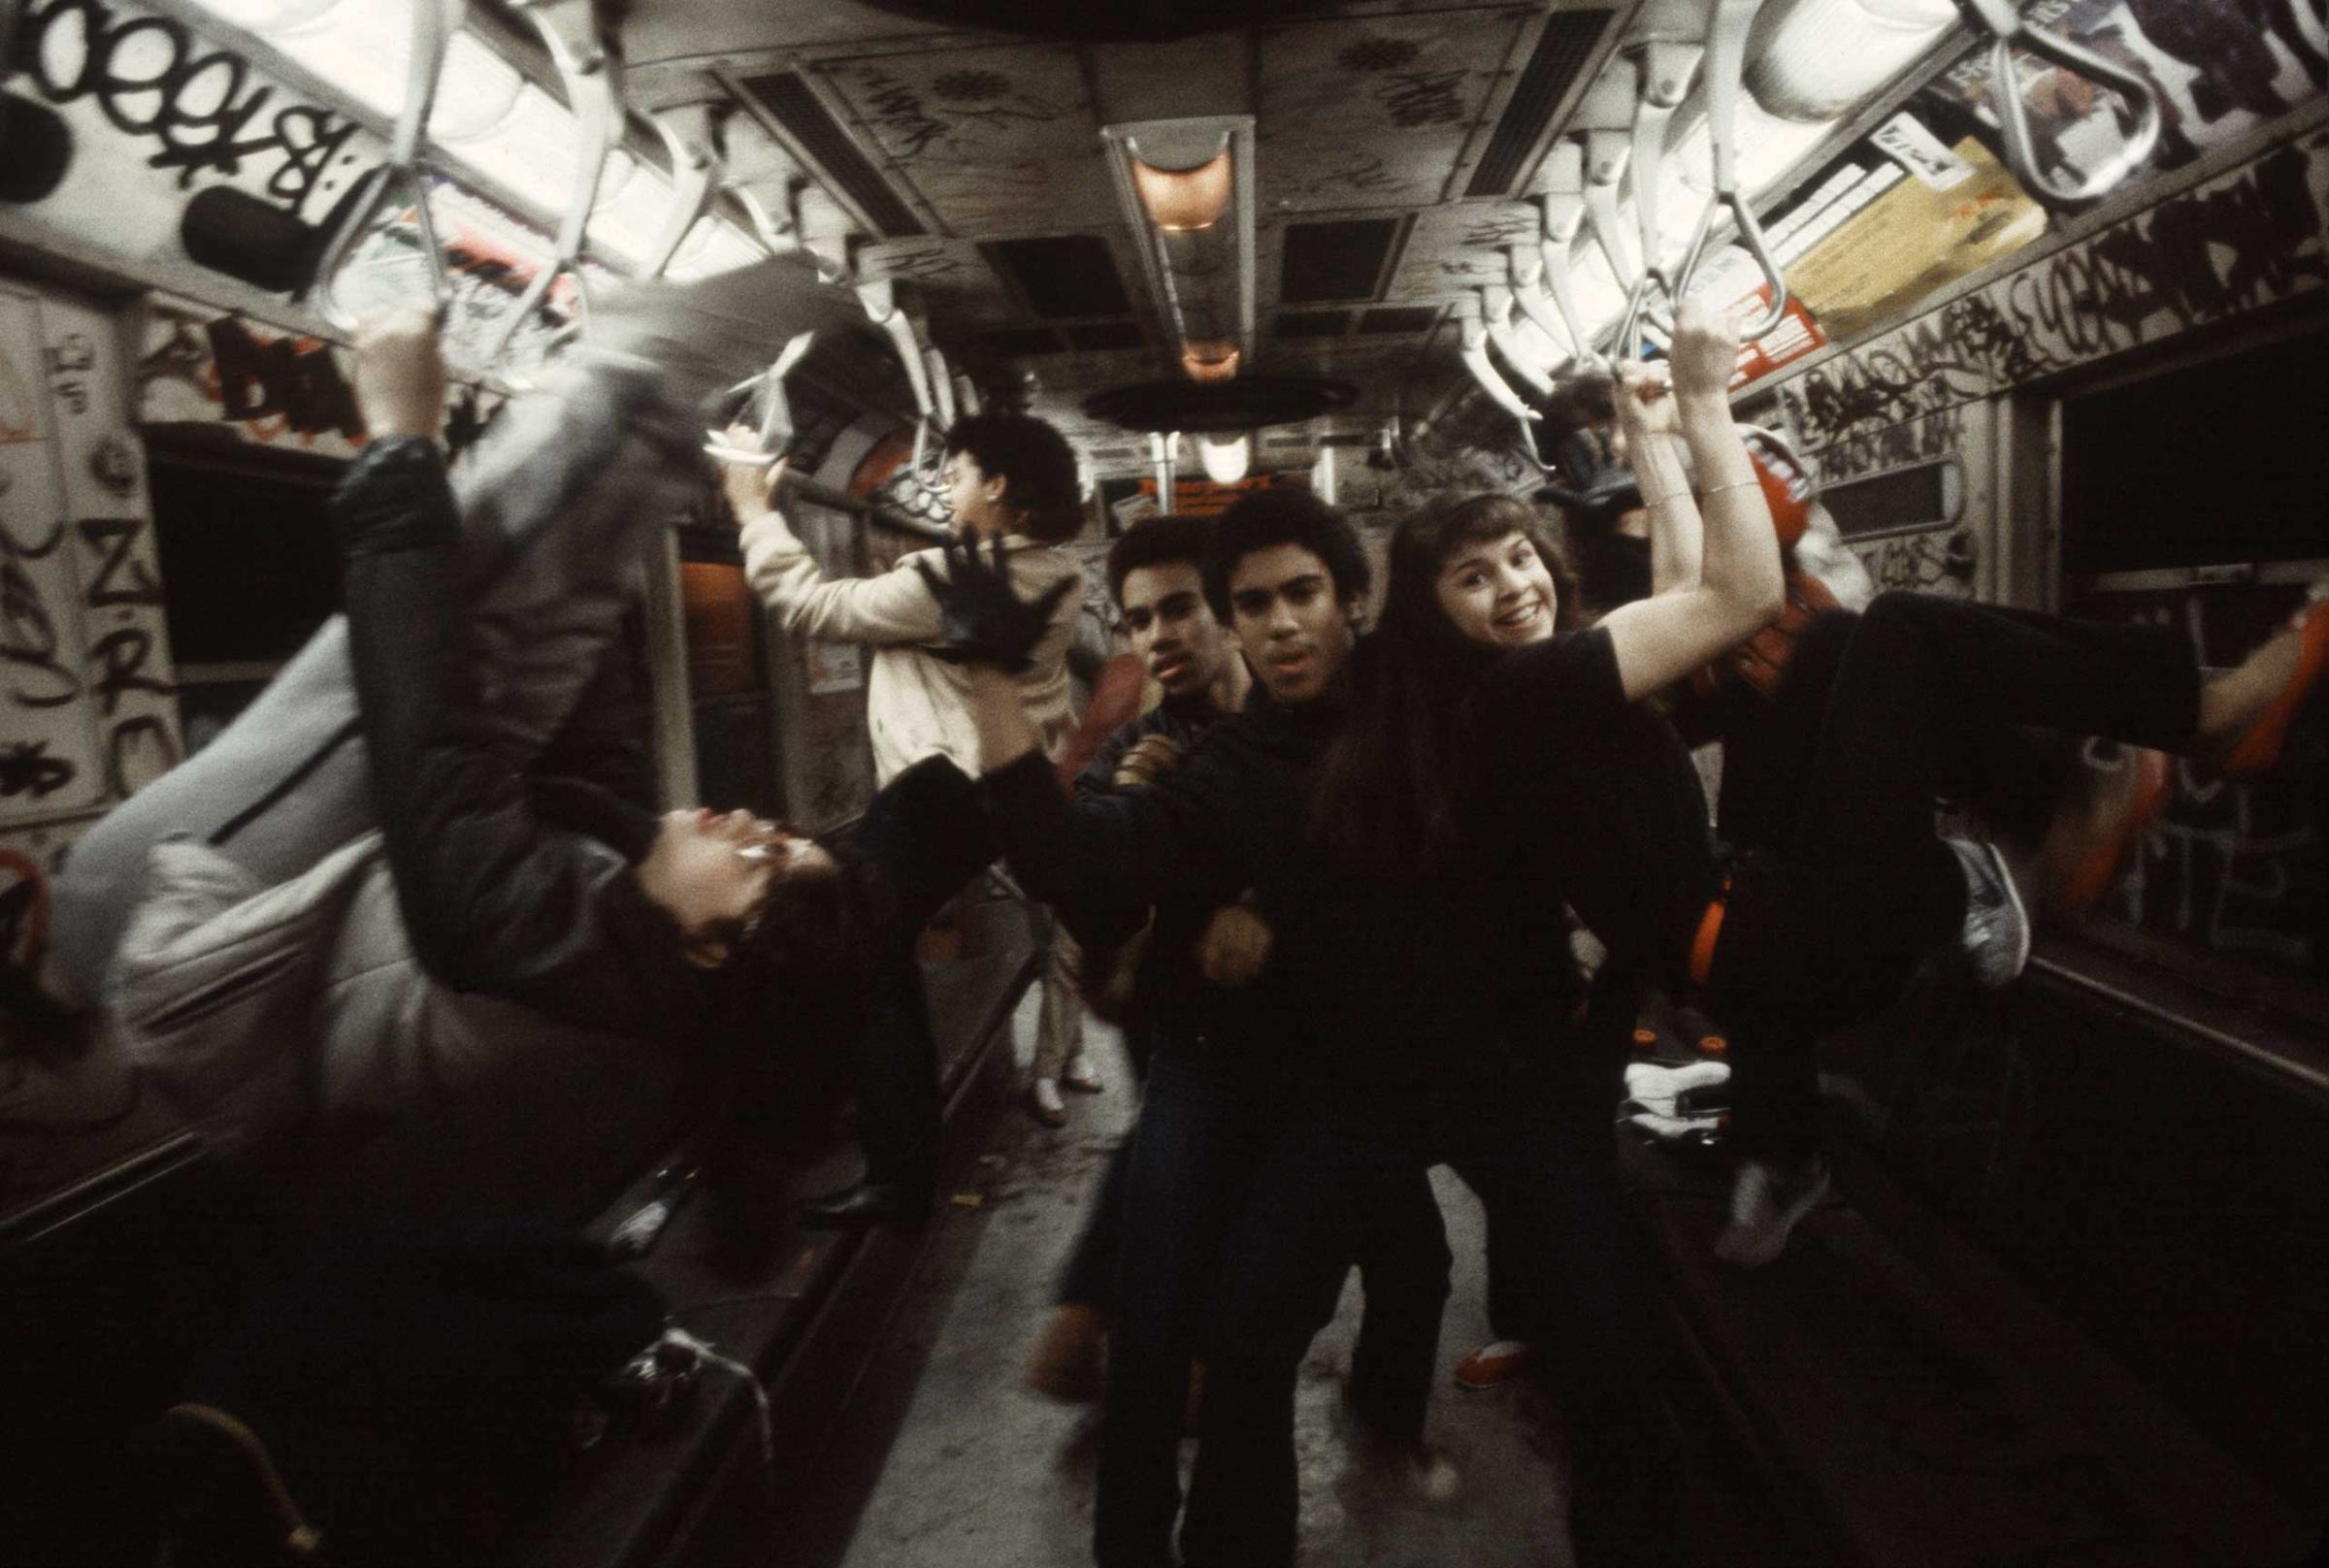 A group of teens pose on the 6 train in the South Bronx, 1981.